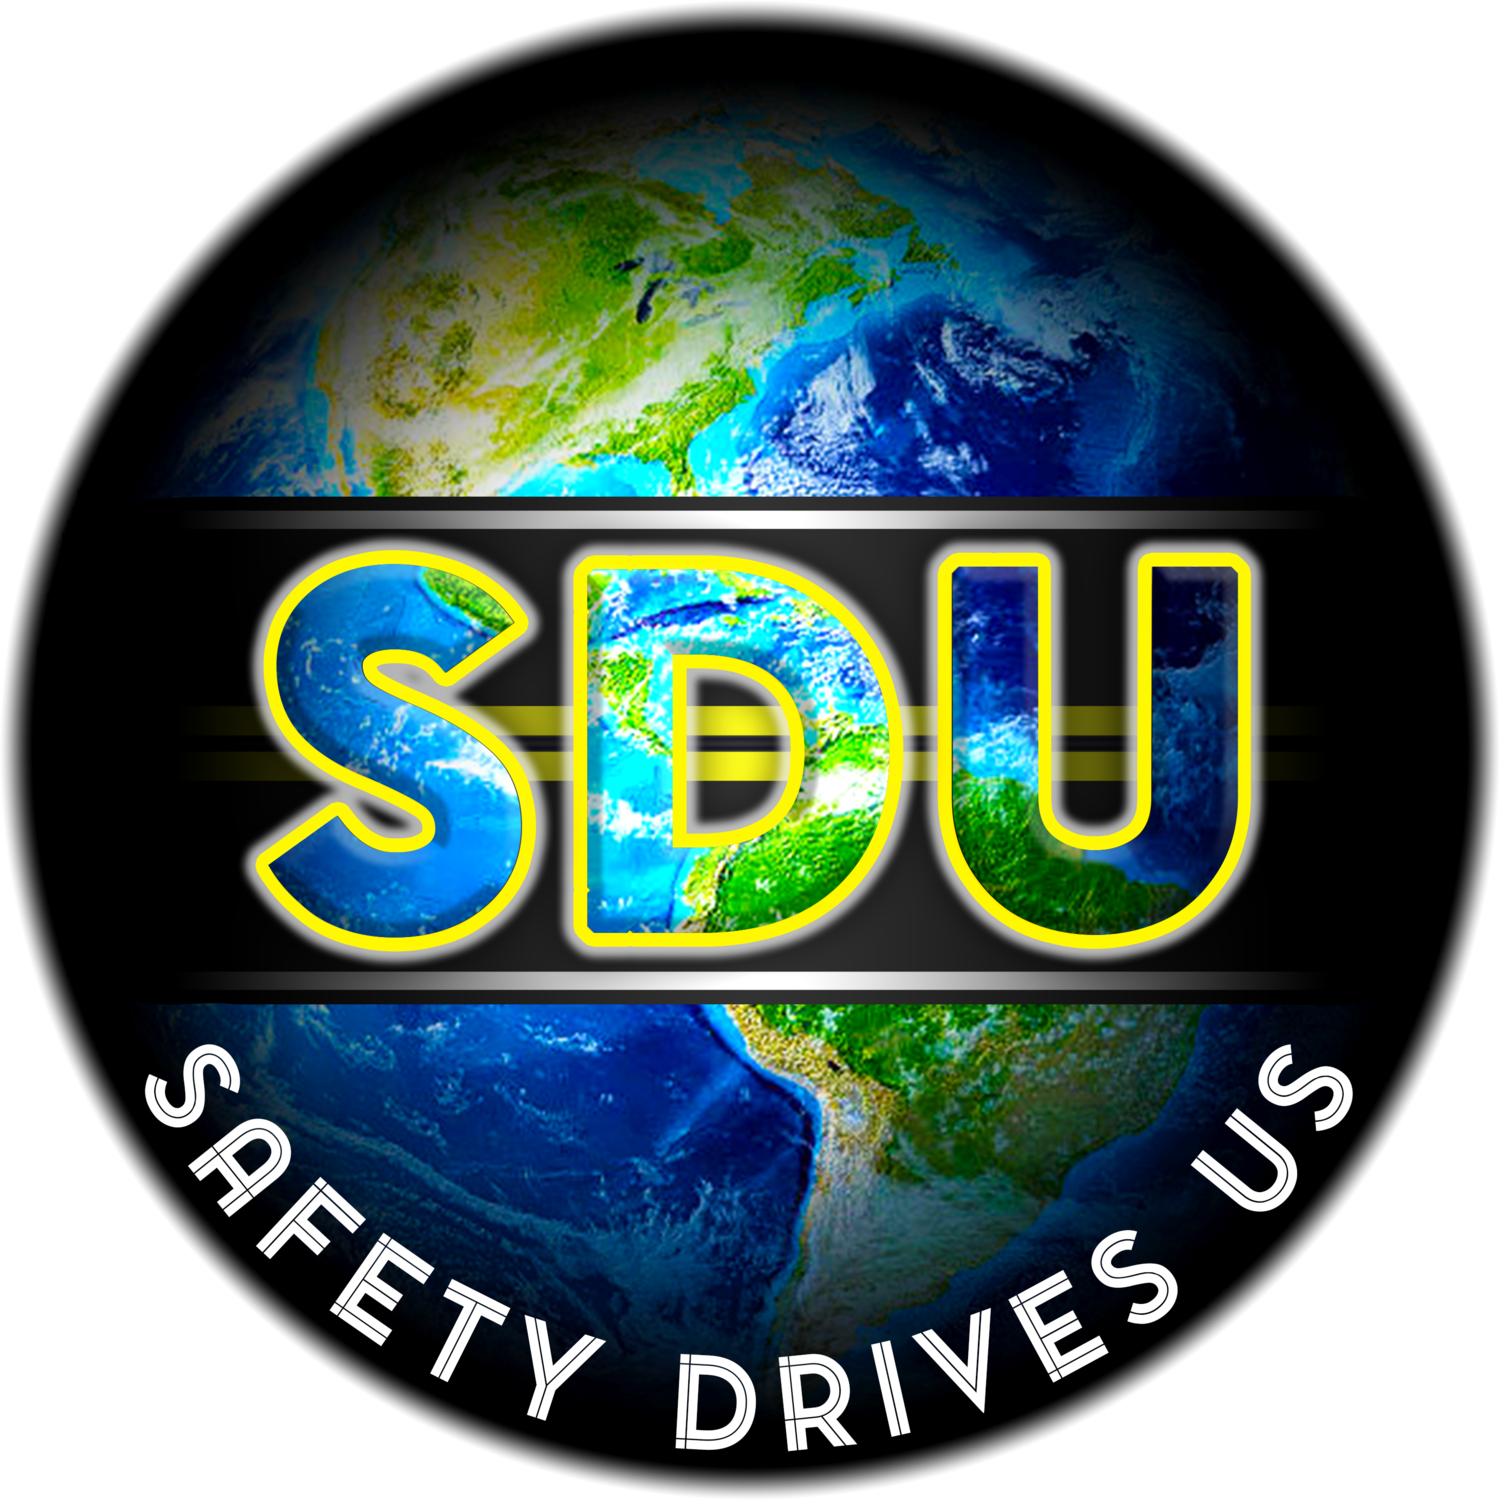 Safety Drives us